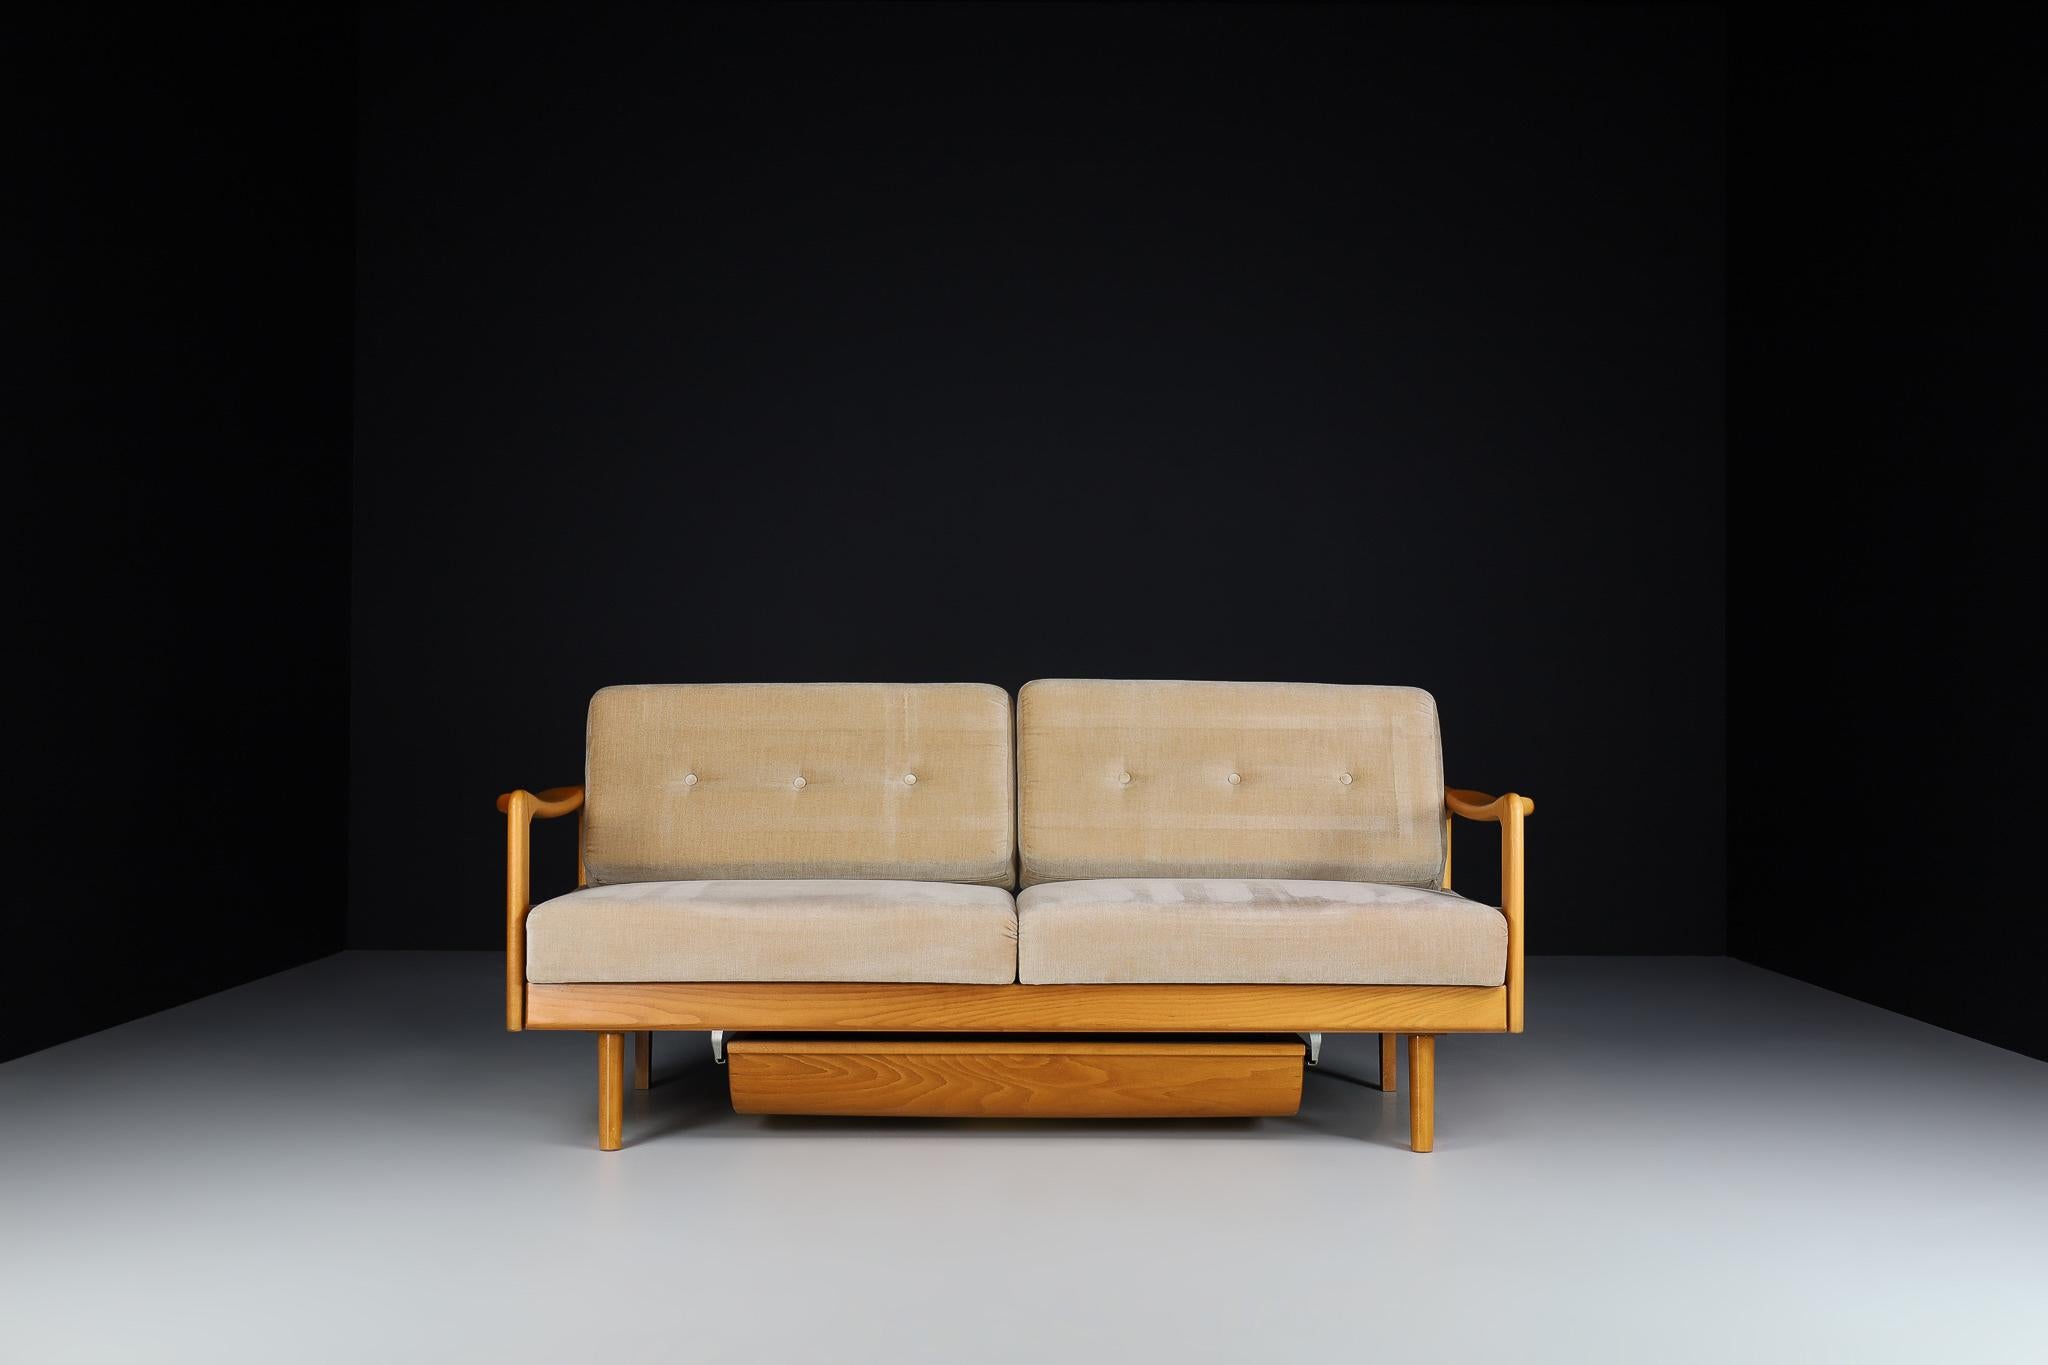 Sofa Model Stella from the 1950s Manufactured by Wilhelm Knoll with original upholstery and made in German.

Wonderful sofa from the 1950s. High-quality, solid frame in honey brown stained beech wood. The sofa can be transformed into a guest bed